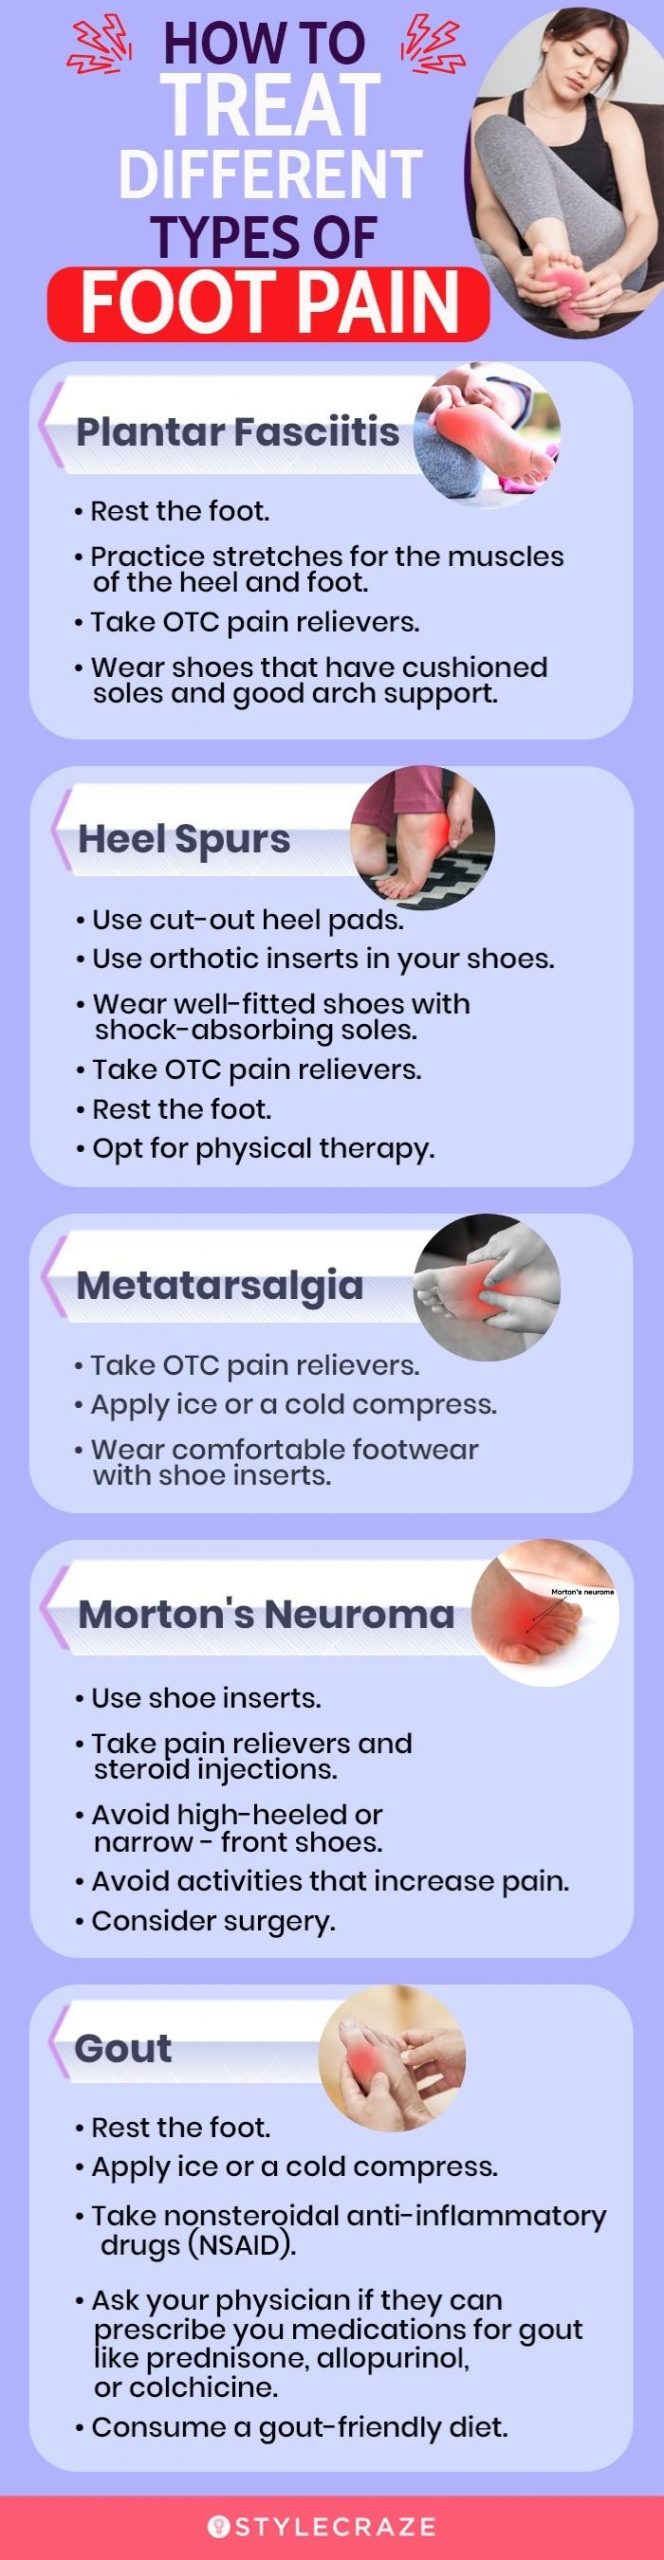 how to treat different types of foot pain (infographic)